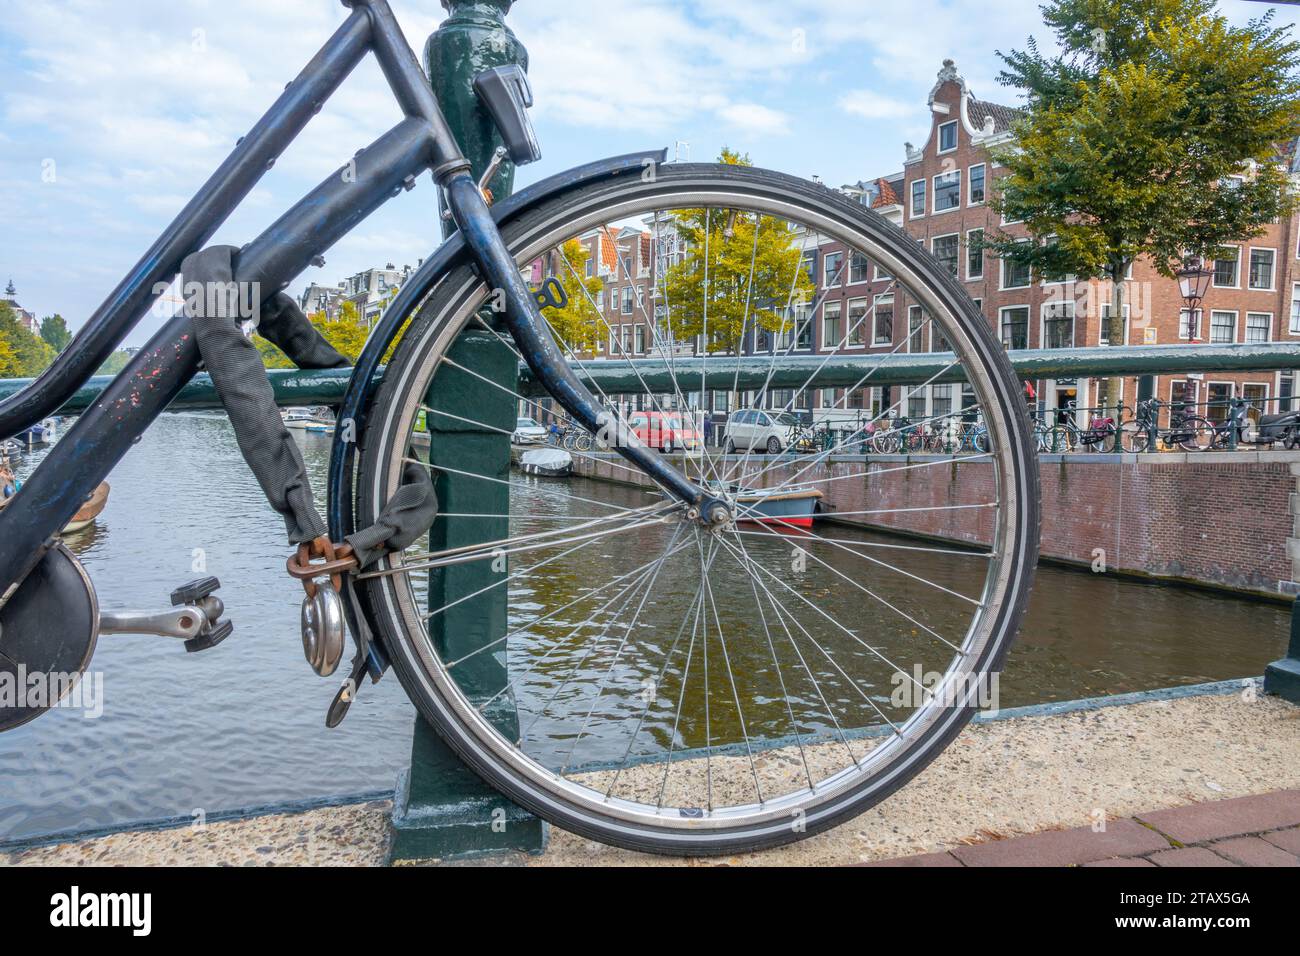 Netherlands. Autumn day in Amsterdam. The wheel of a bicycle parked on the bridge and the canal embankment Stock Photo